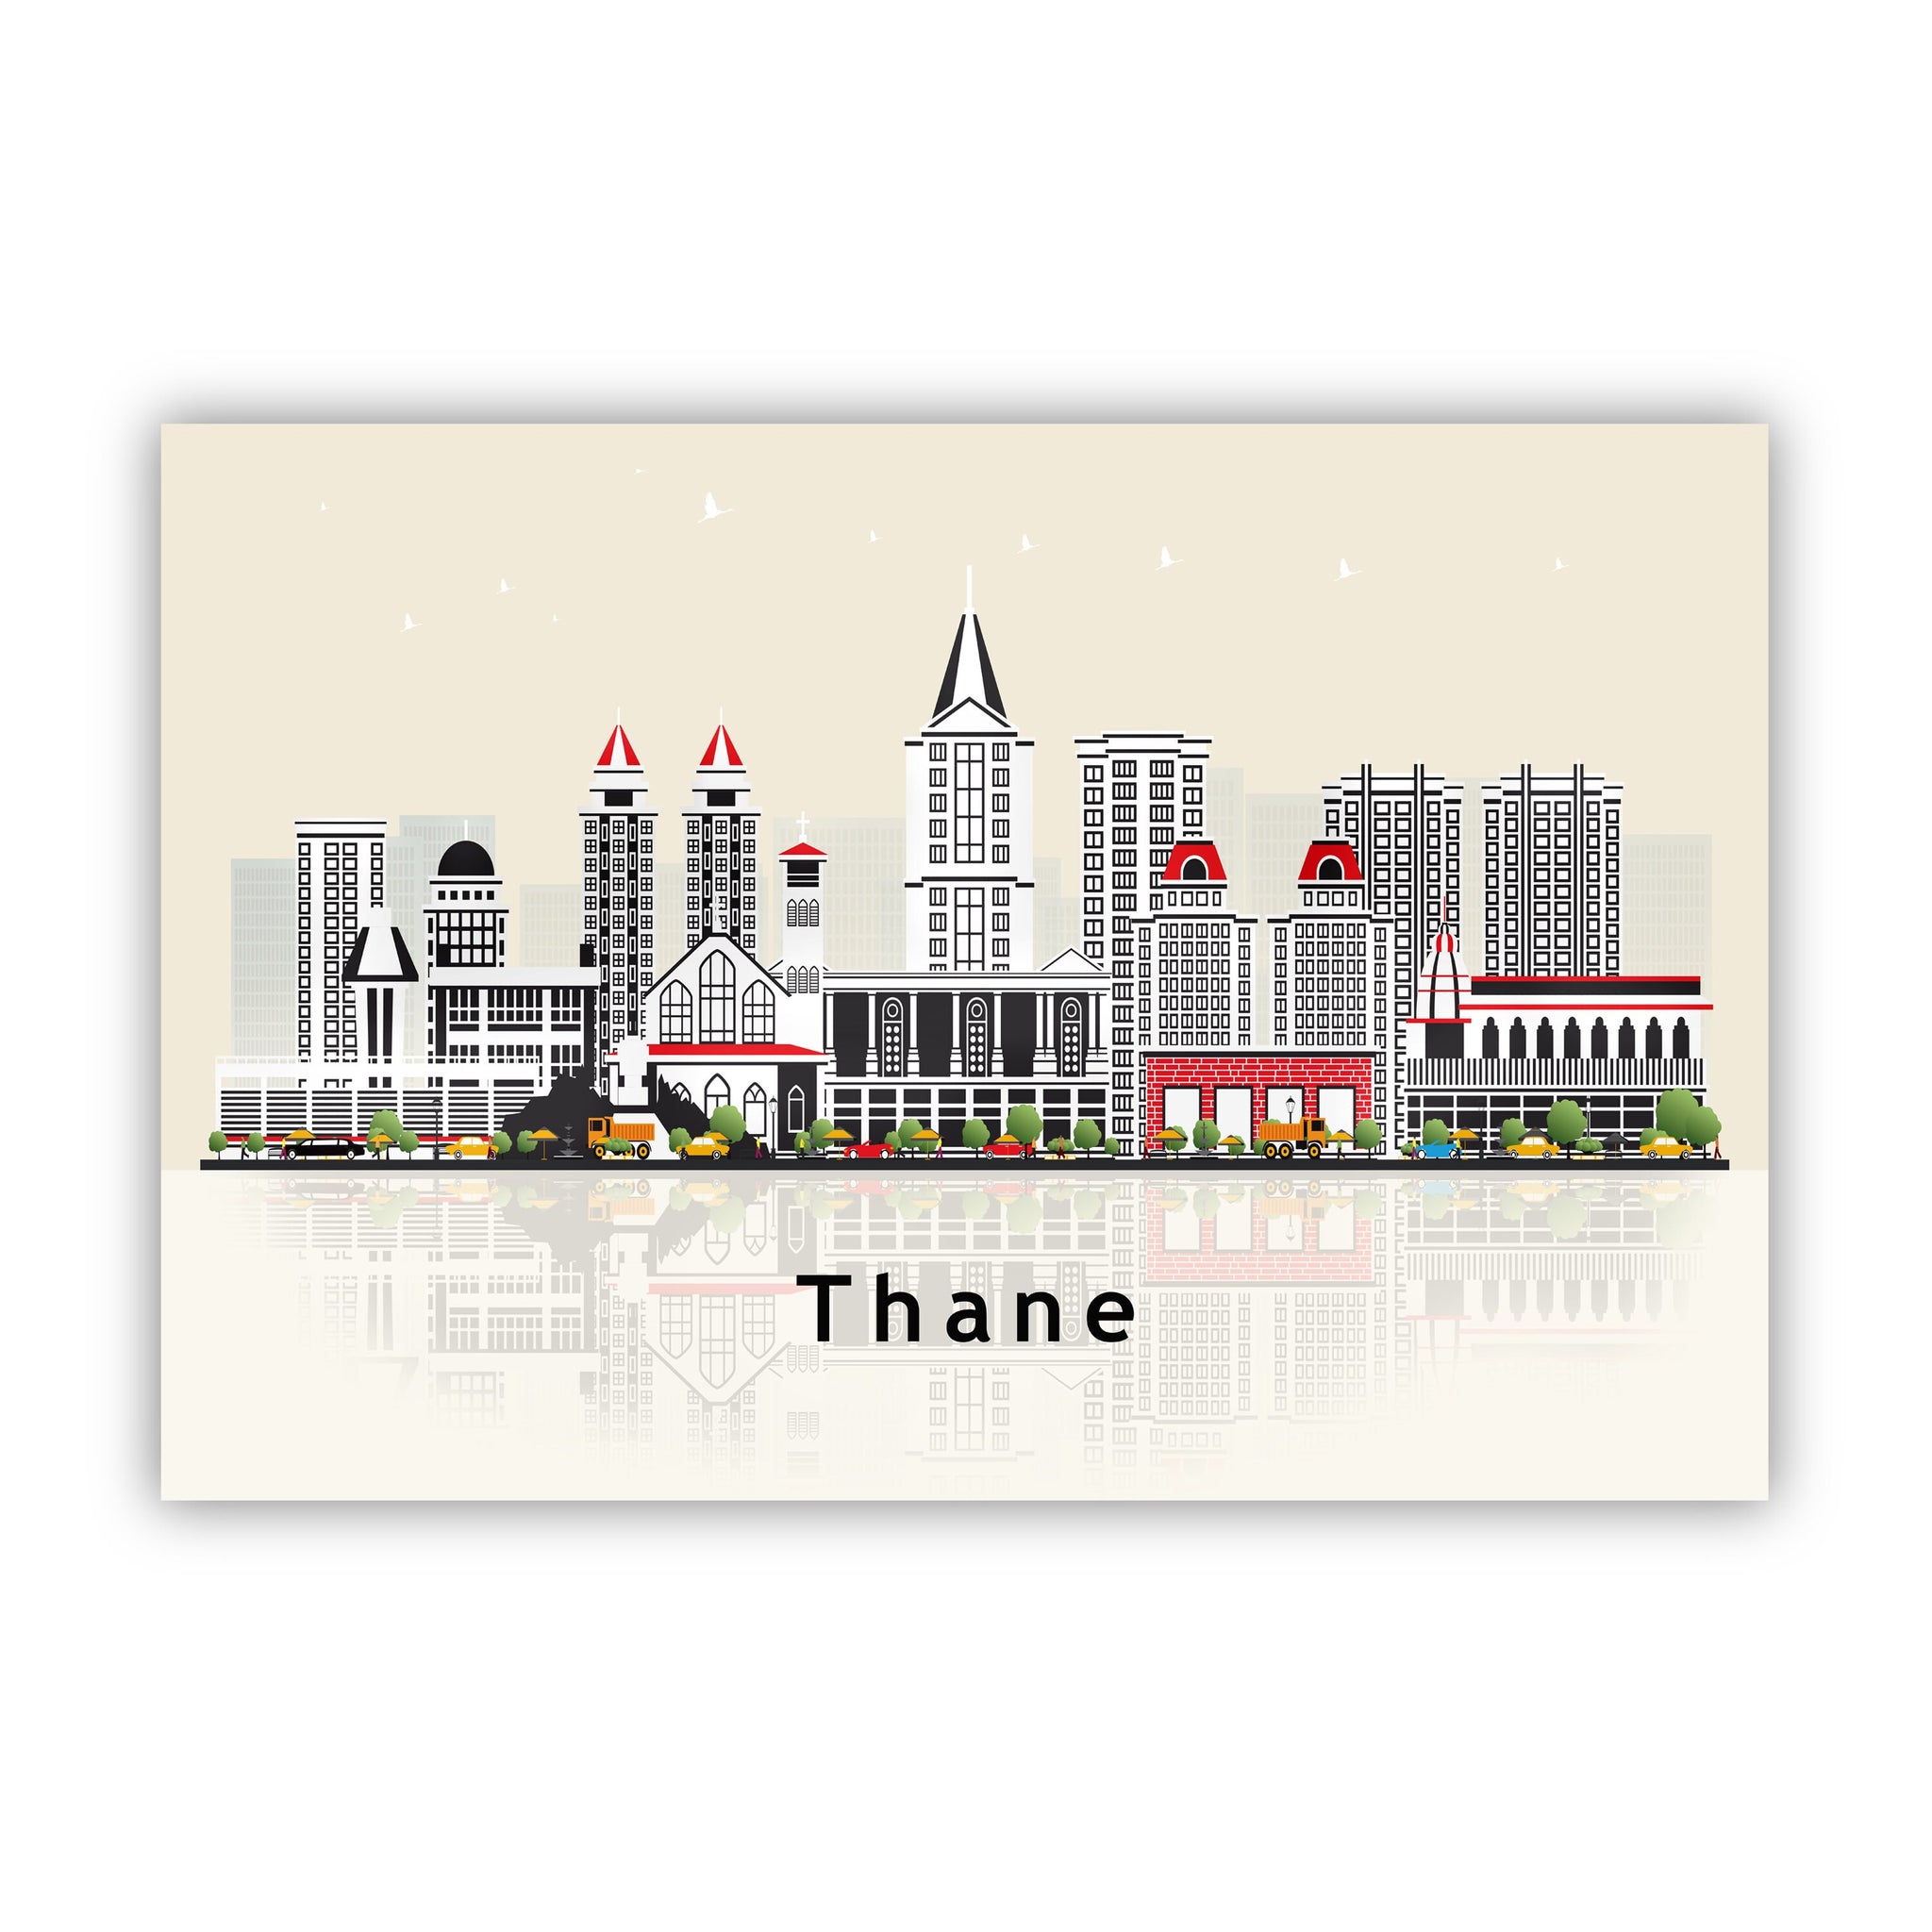 THANE INDIA Illustration skyline poster, Modern skyline cityscape poster, India city skyline landmark map poster, Home wall decoration